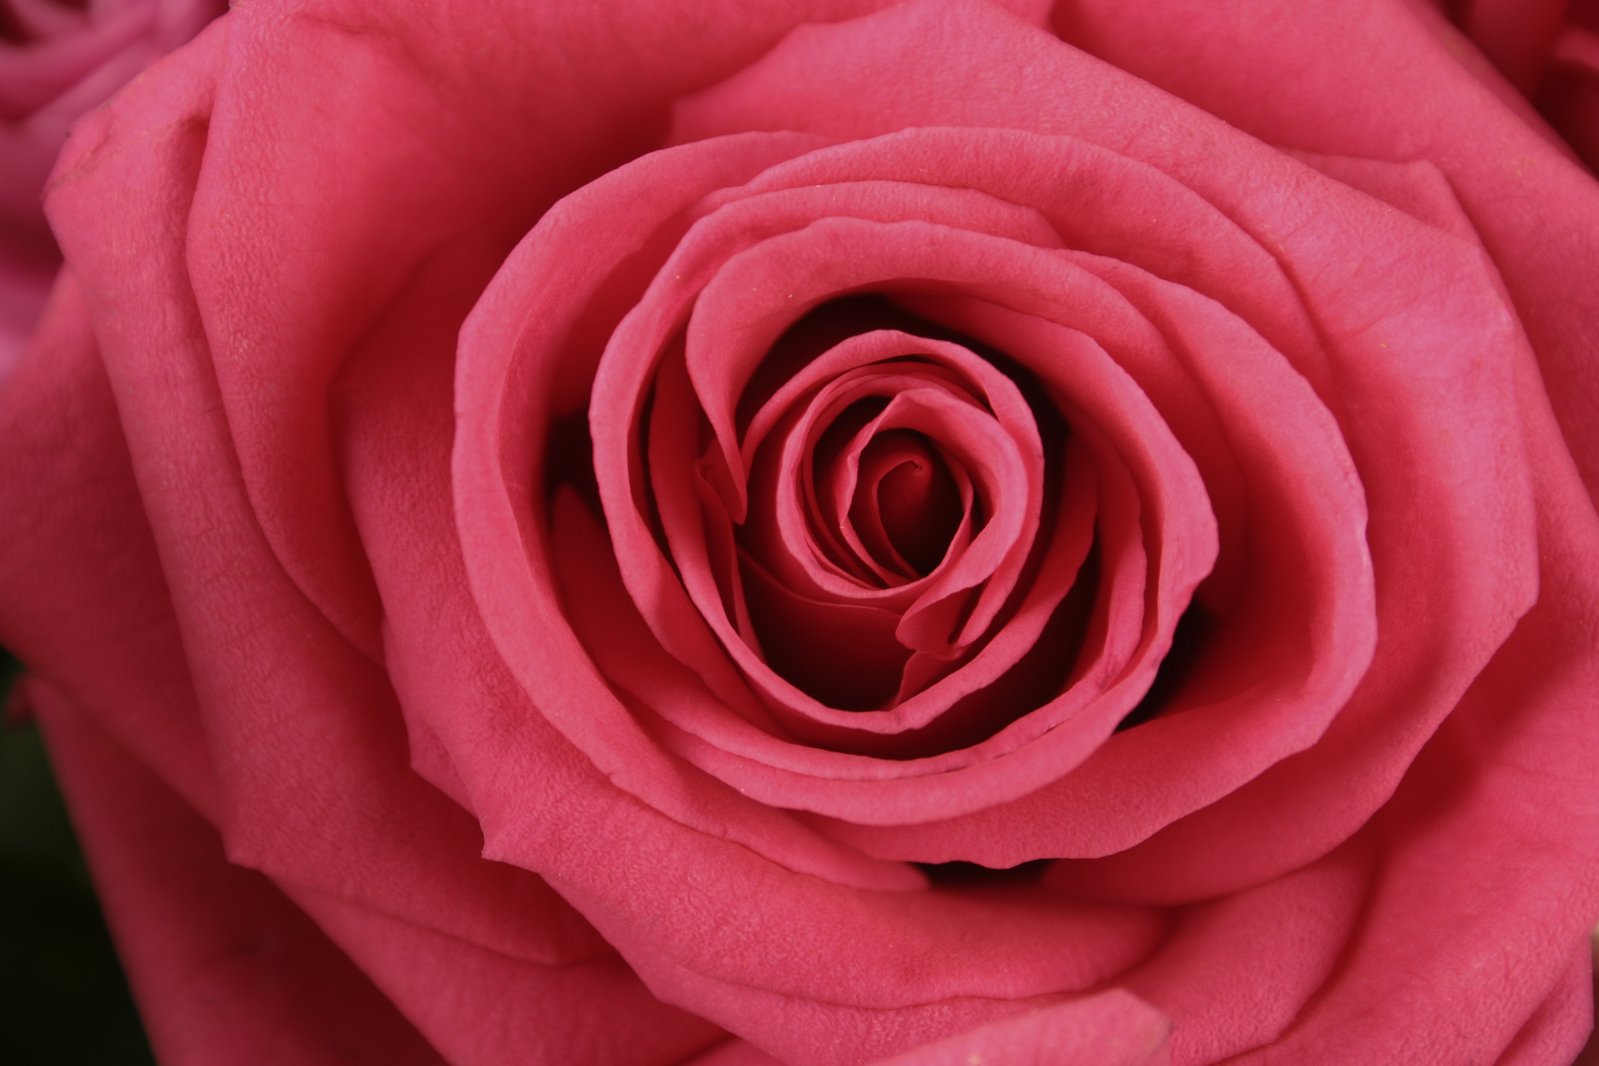 the large pink rose is in the center of the flower